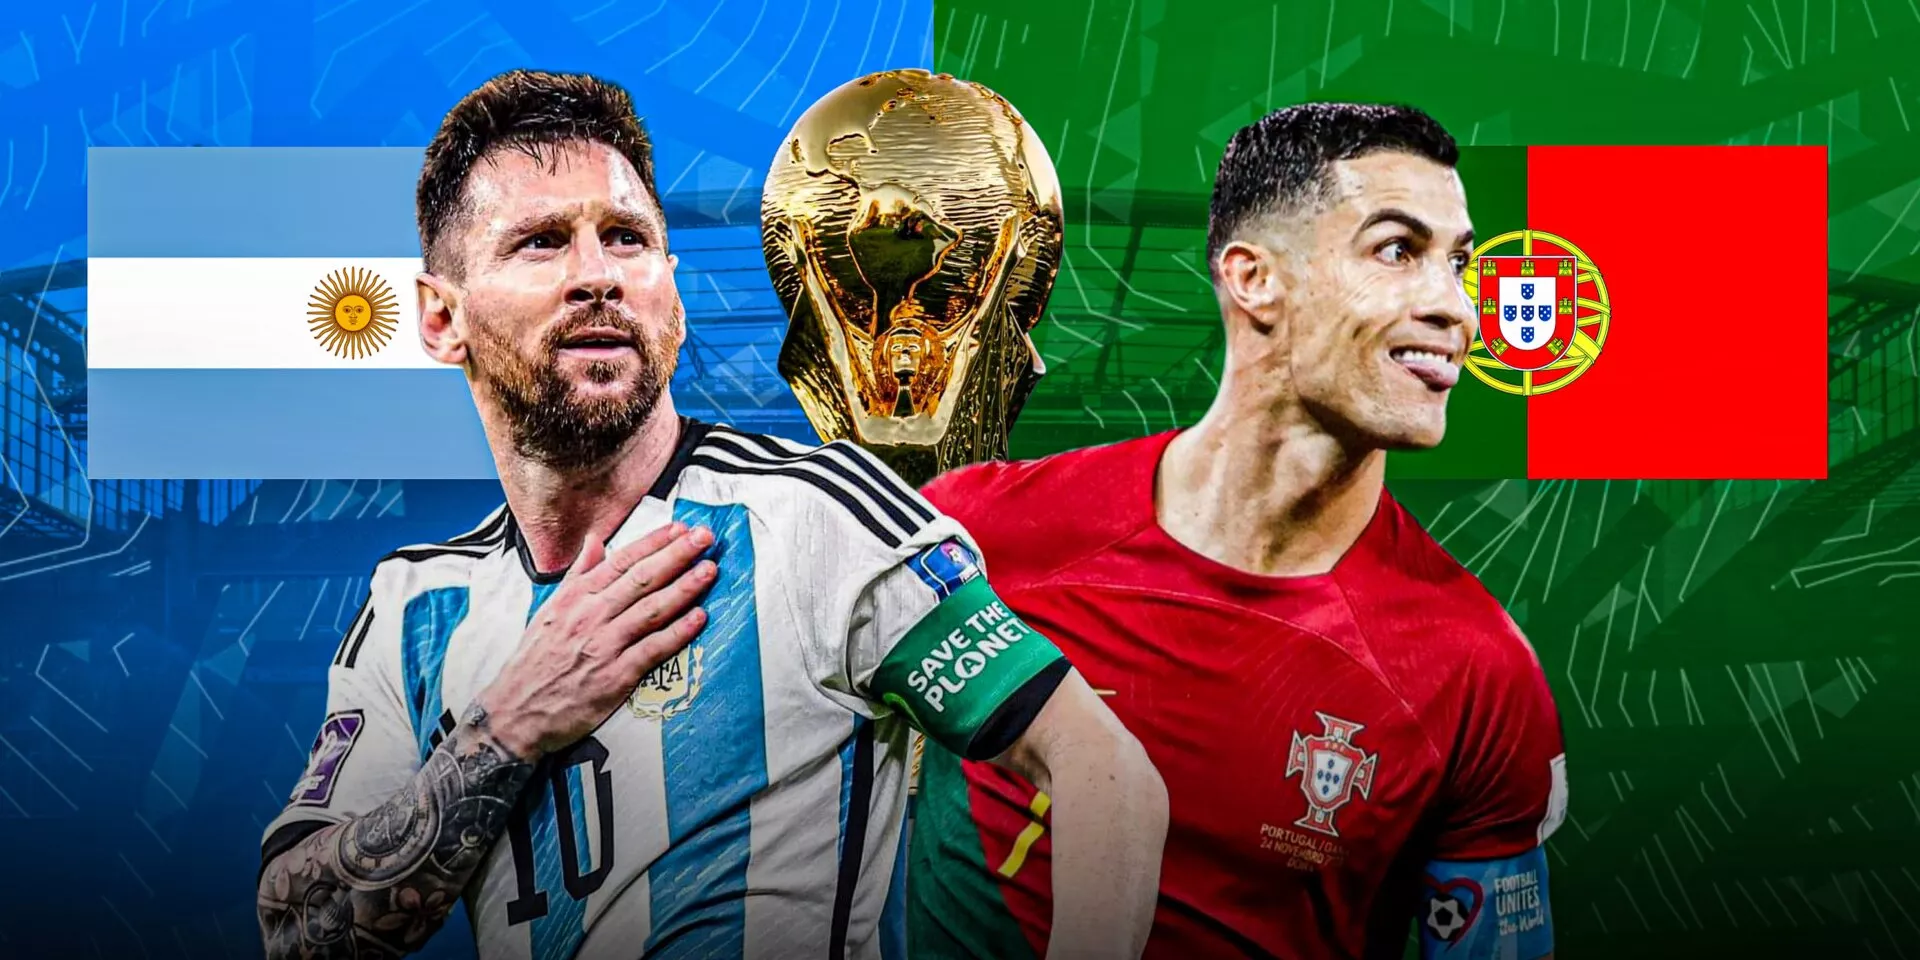 Lionel Messi vs Cristiano Ronaldo: Who had a better World Cup 2022 group  stage?